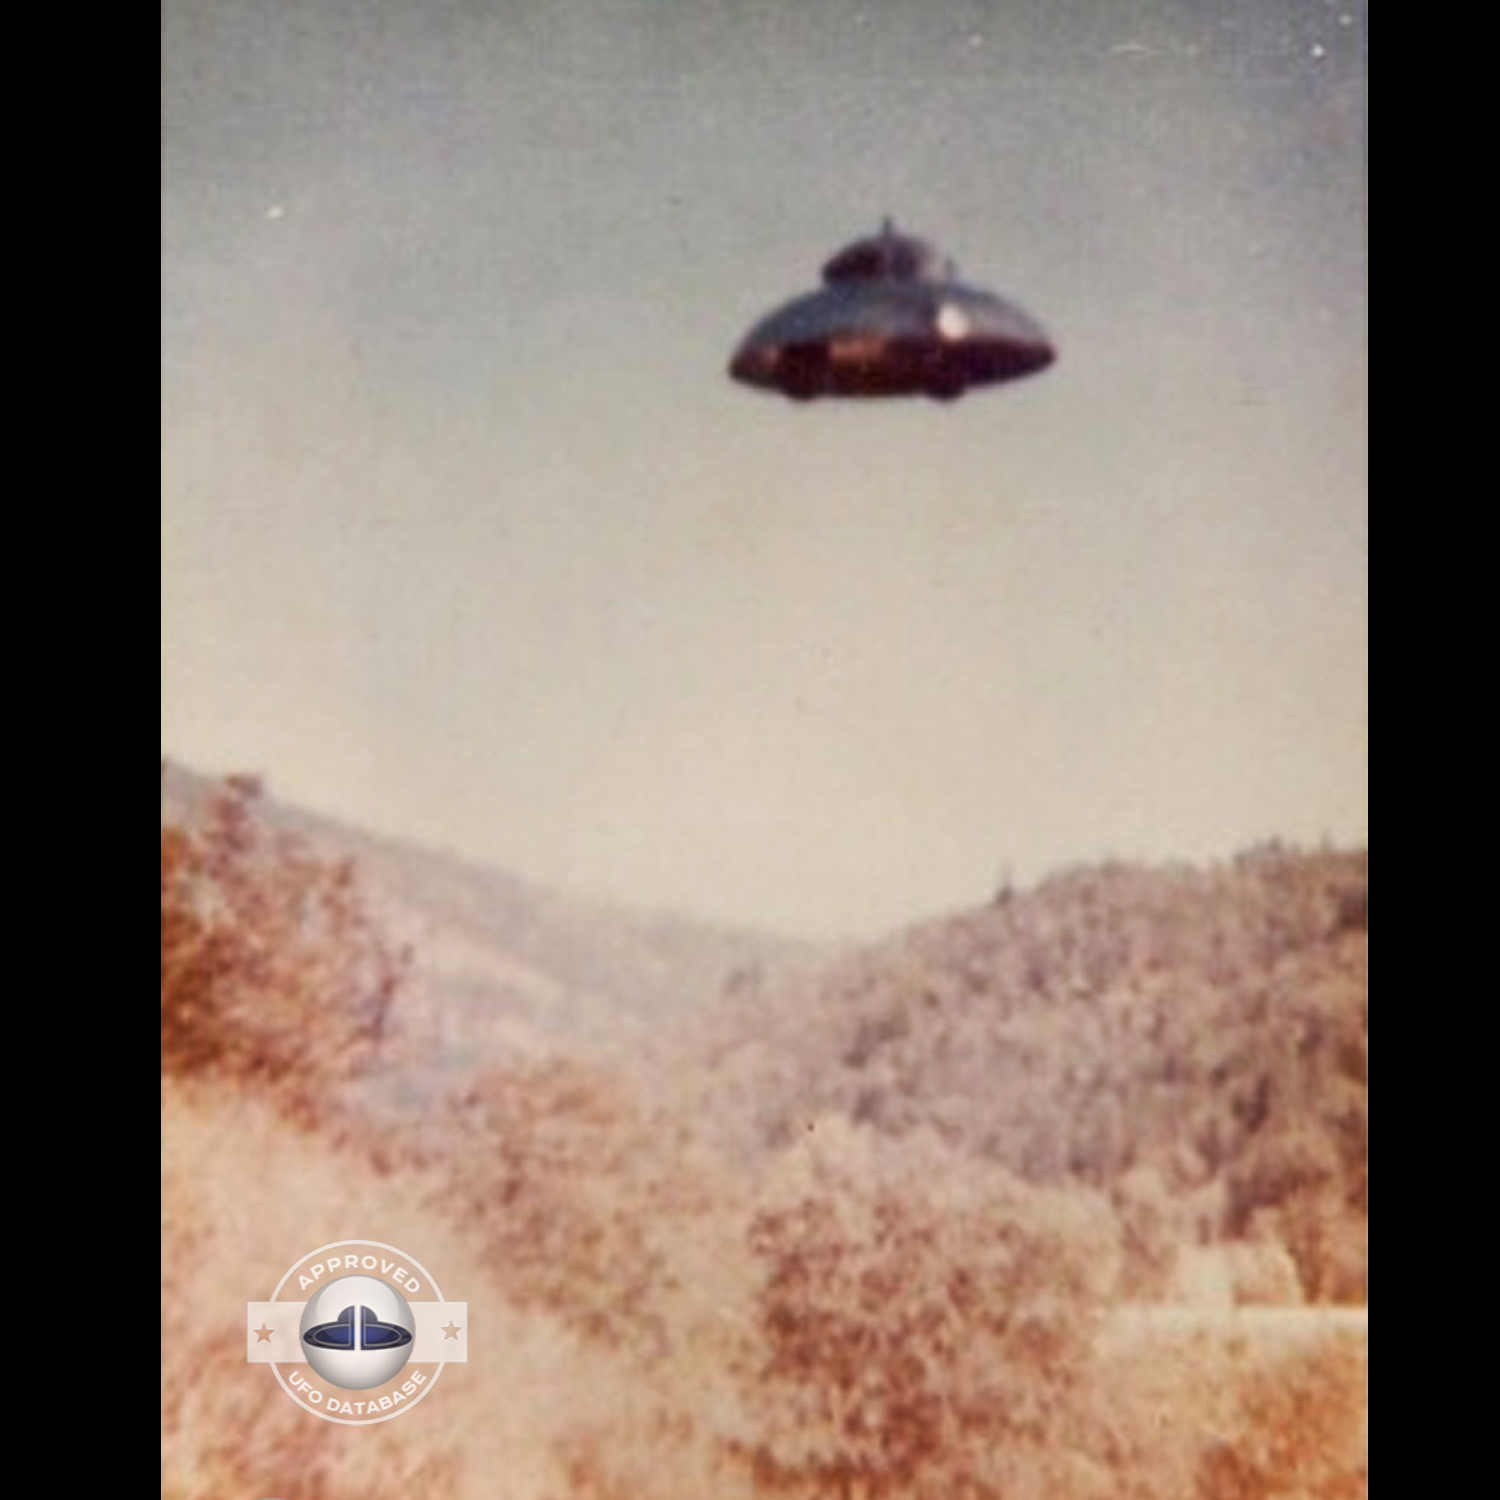 This UFO picture has been in several reports and controversies, 1970s UFO Picture #138-2